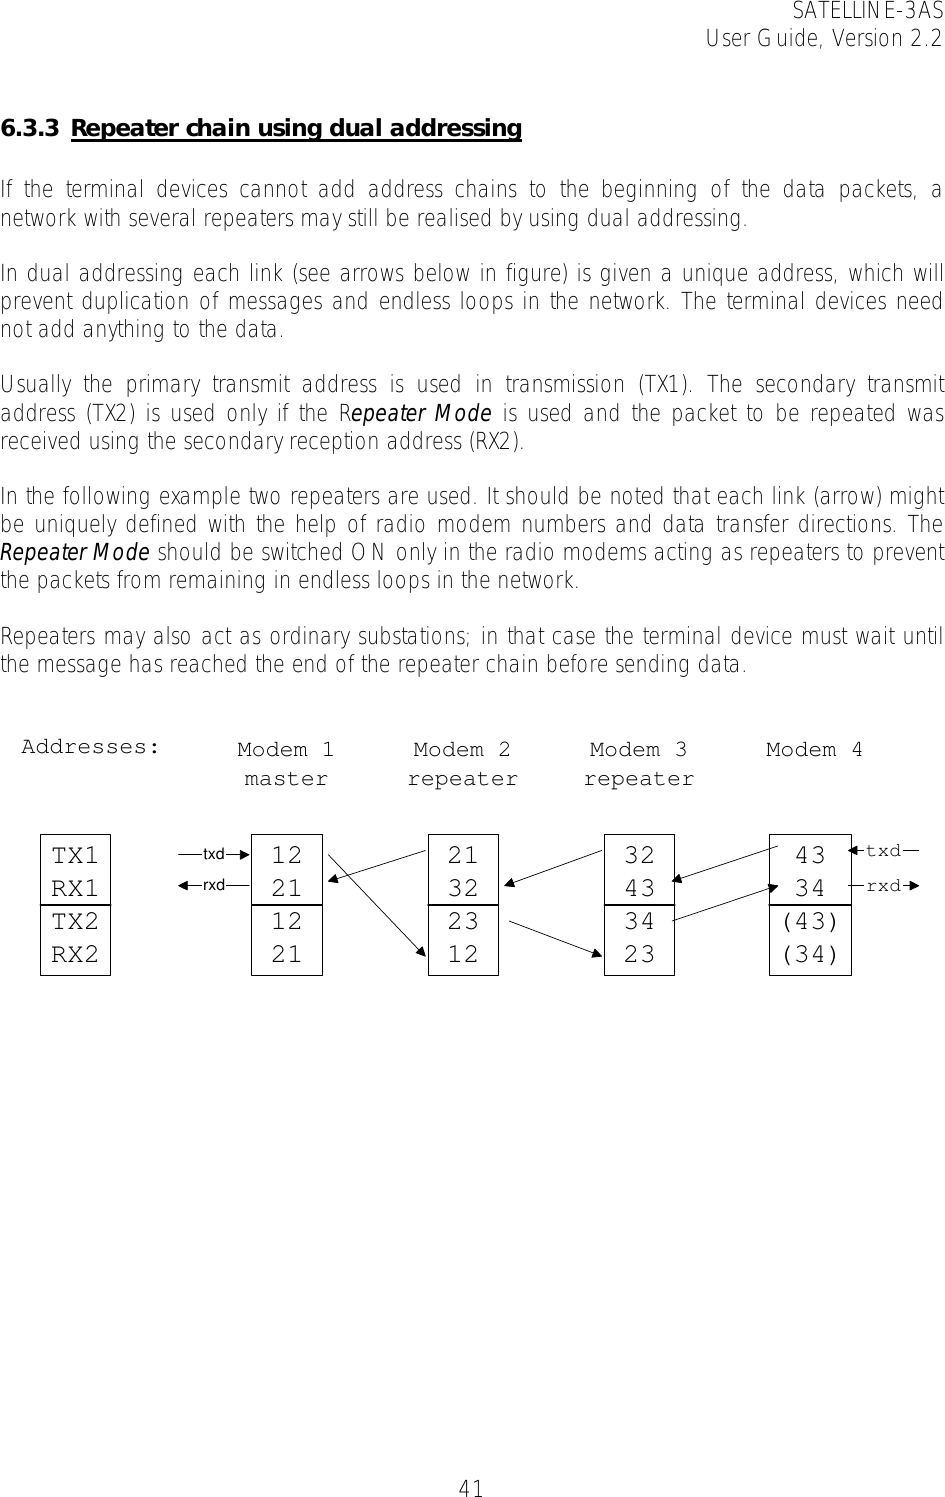 SATELLINE-3AS User Guide, Version 2.2   41 6.3.3 Repeater chain using dual addressing  If the terminal devices cannot add address chains to the beginning of the data packets, a network with several repeaters may still be realised by using dual addressing.  In dual addressing each link (see arrows below in figure) is given a unique address, which will prevent duplication of messages and endless loops in the network. The terminal devices need not add anything to the data.  Usually the primary transmit address is used in transmission (TX1). The secondary transmit address (TX2) is used only if the Repeater Mode is used and the packet to be repeated was received using the secondary reception address (RX2).  In the following example two repeaters are used. It should be noted that each link (arrow) might be uniquely defined with the help of radio modem numbers and data transfer directions. The Repeater Mode should be switched ON only in the radio modems acting as repeaters to prevent the packets from remaining in endless loops in the network.   Repeaters may also act as ordinary substations; in that case the terminal device must wait until the message has reached the end of the repeater chain before sending data.    1221122121322312324334234334(43)(34)rxdtxdrxdtxdModem 1masterModem 2repeaterModem 3repeaterModem 4TX1RX1TX2RX2Addresses: